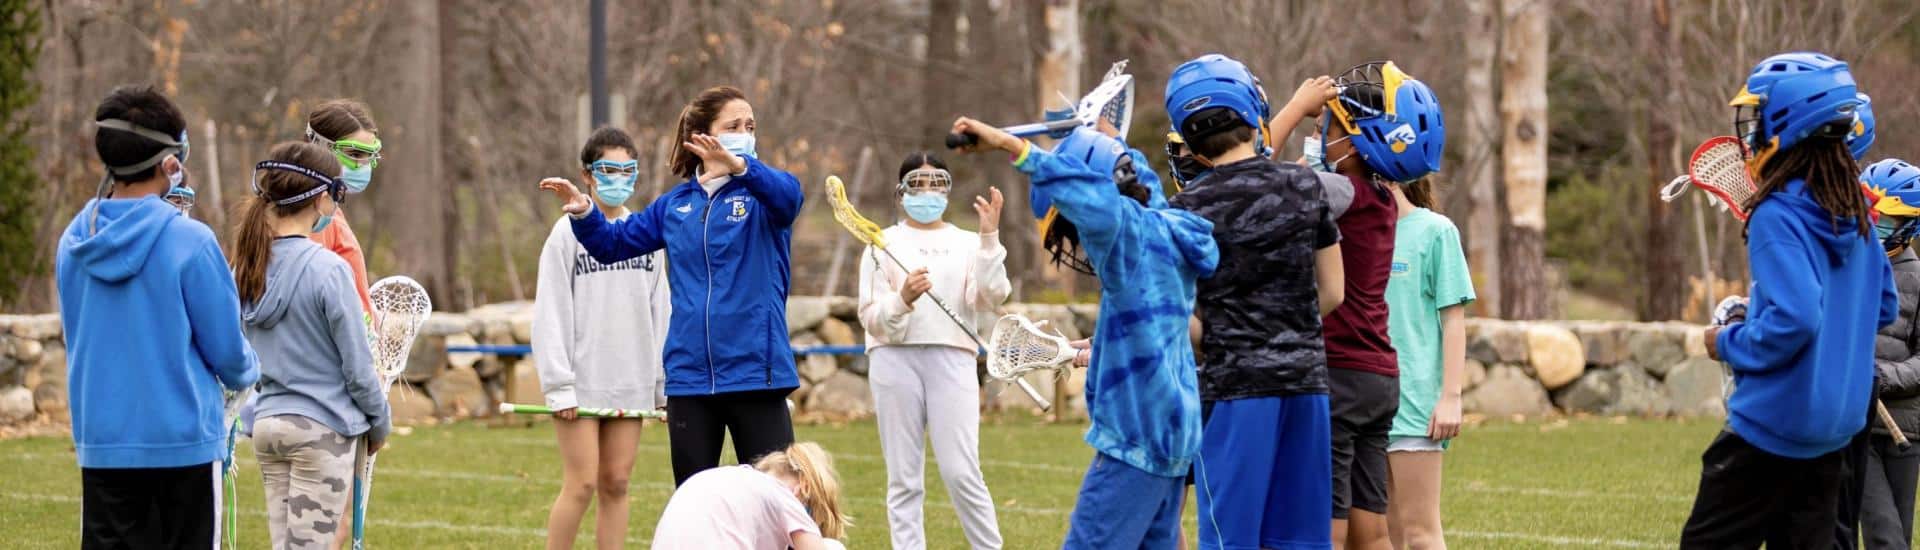 Abbey Nyland coaching middle school lacrosse players